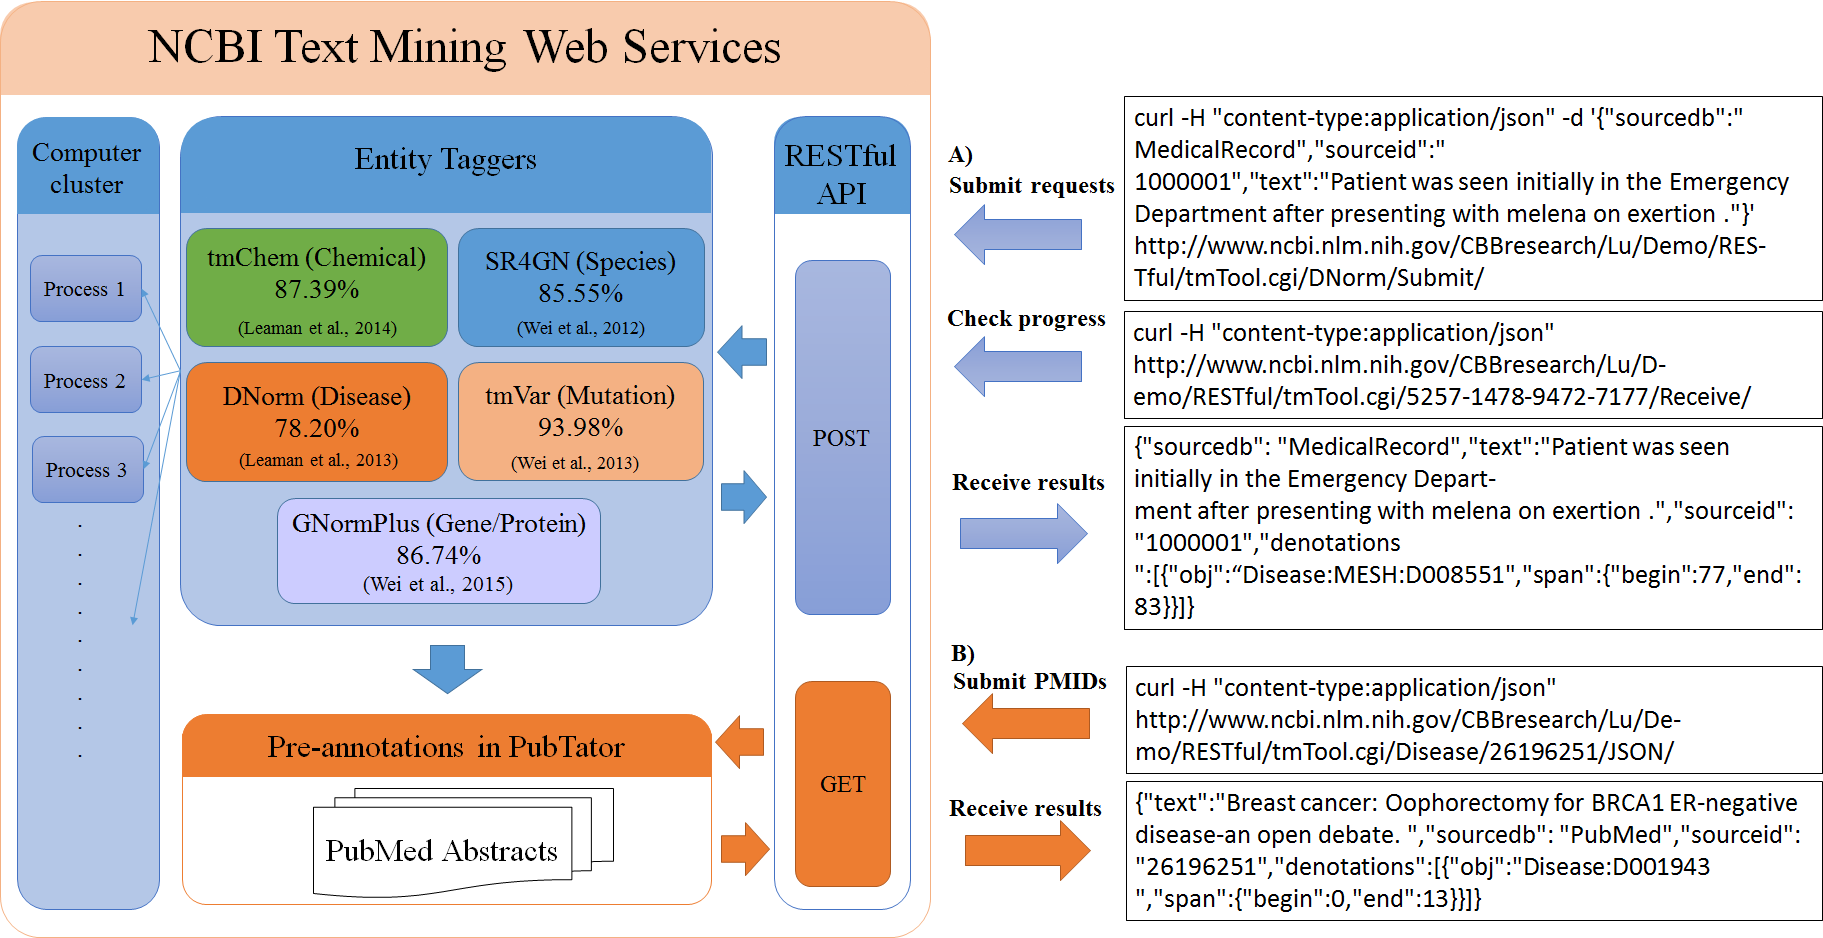 Overview of the NCBI text mining web services